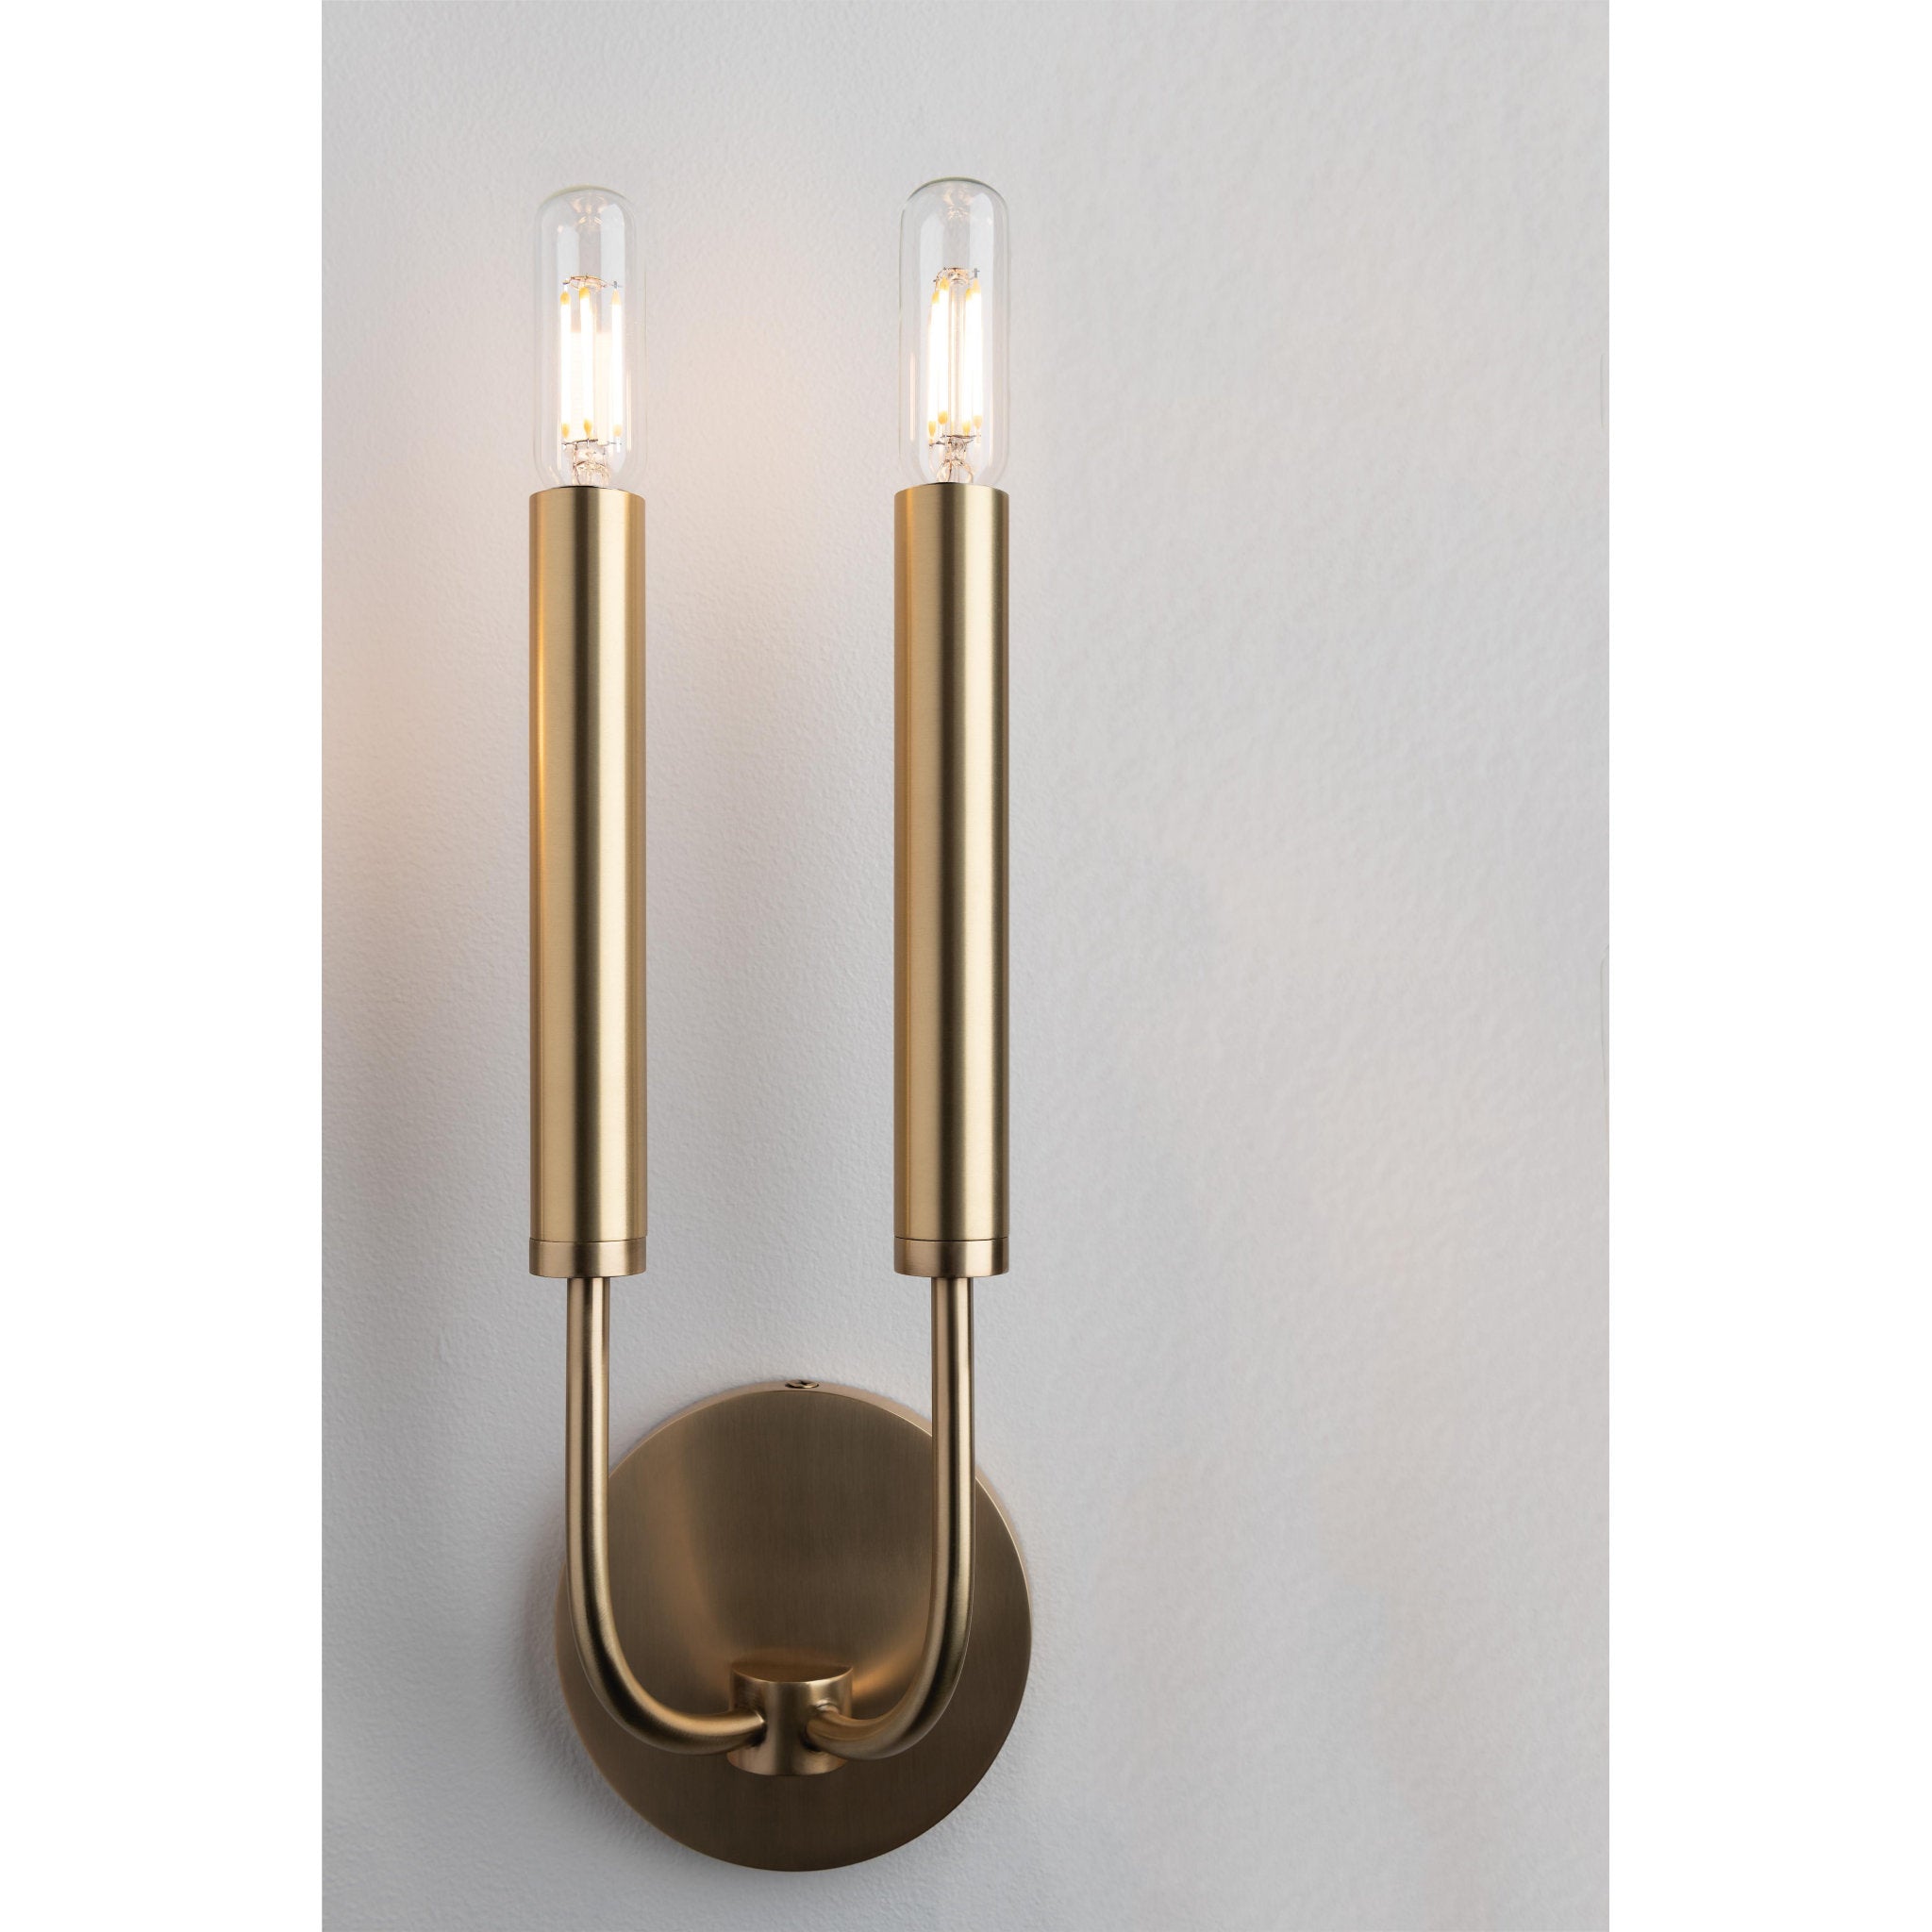 Gideon 2 Light Wall Sconce in Aged Brass